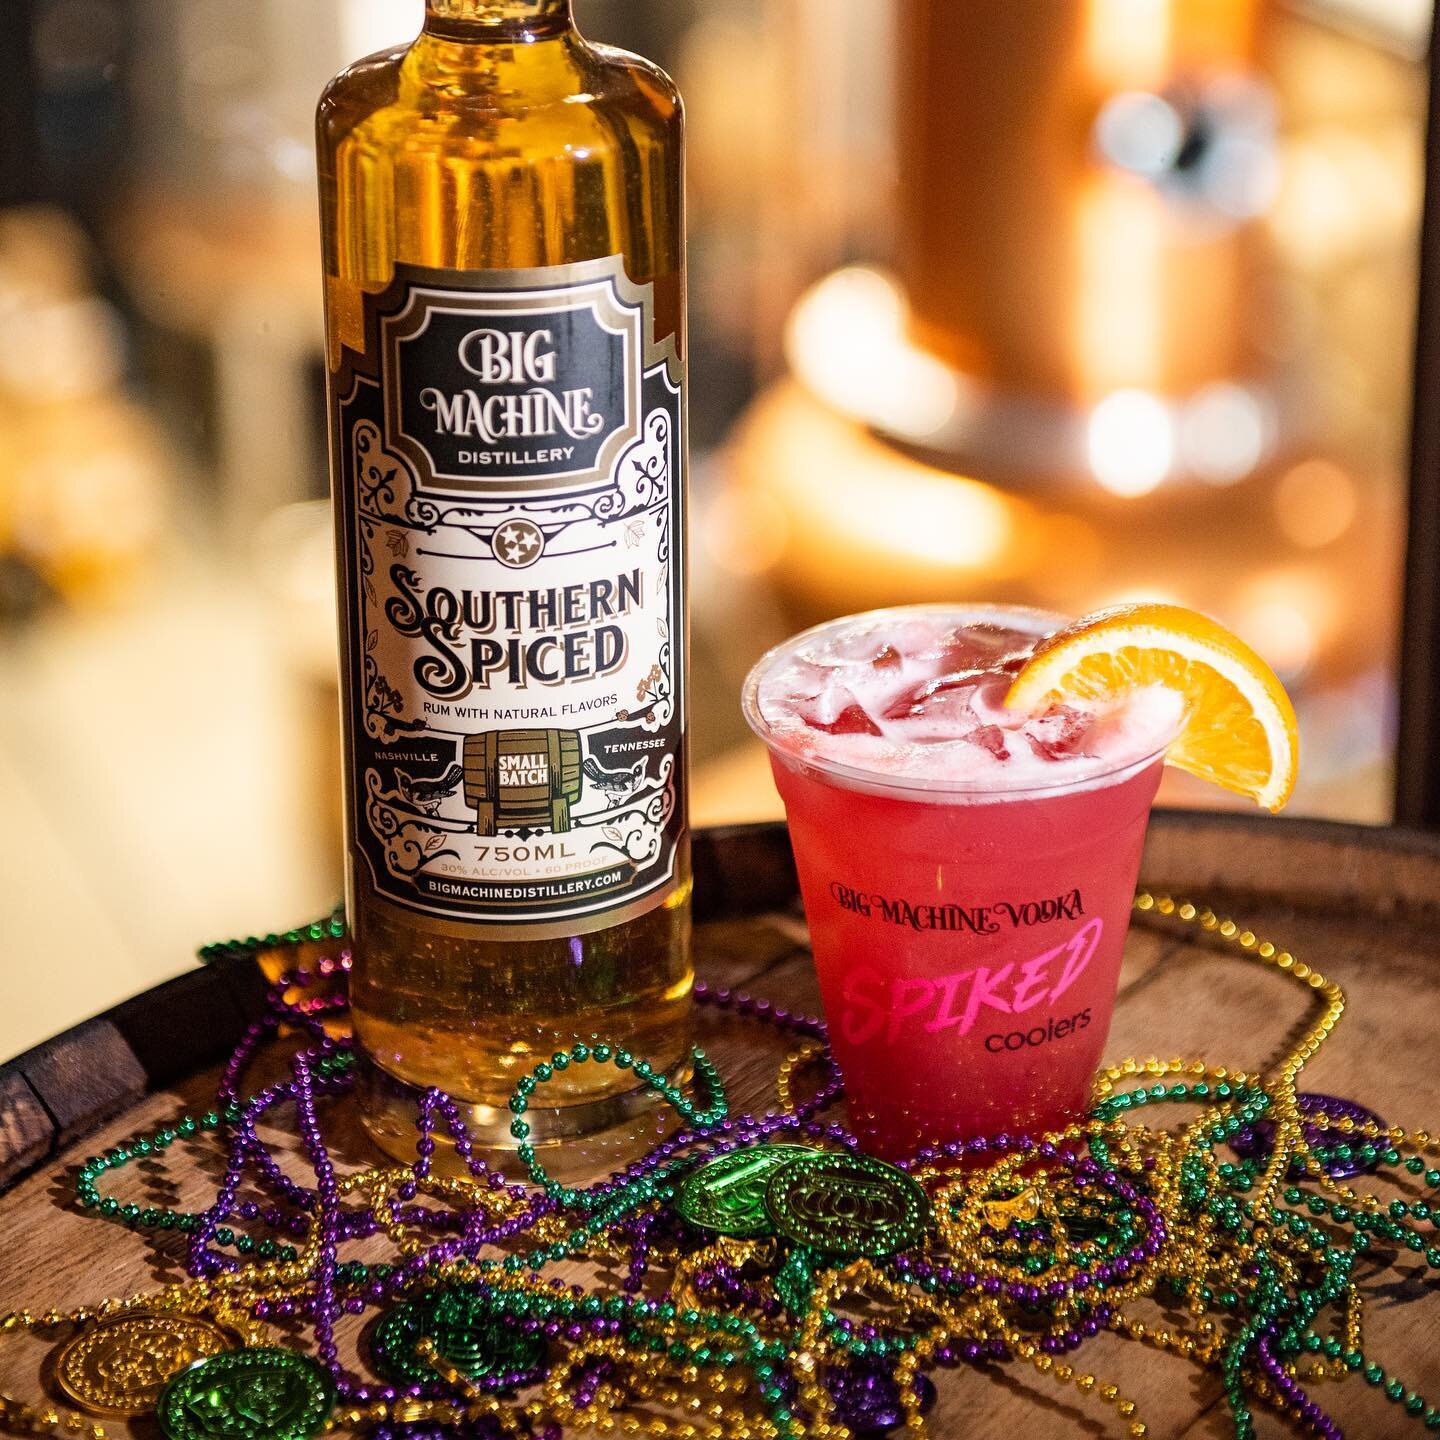 Happy Mardi Gras! Bring the celebration into your home by making a Big Machine Hurricane with our Southern Spiced Rum. Swipe to see the recipe card!